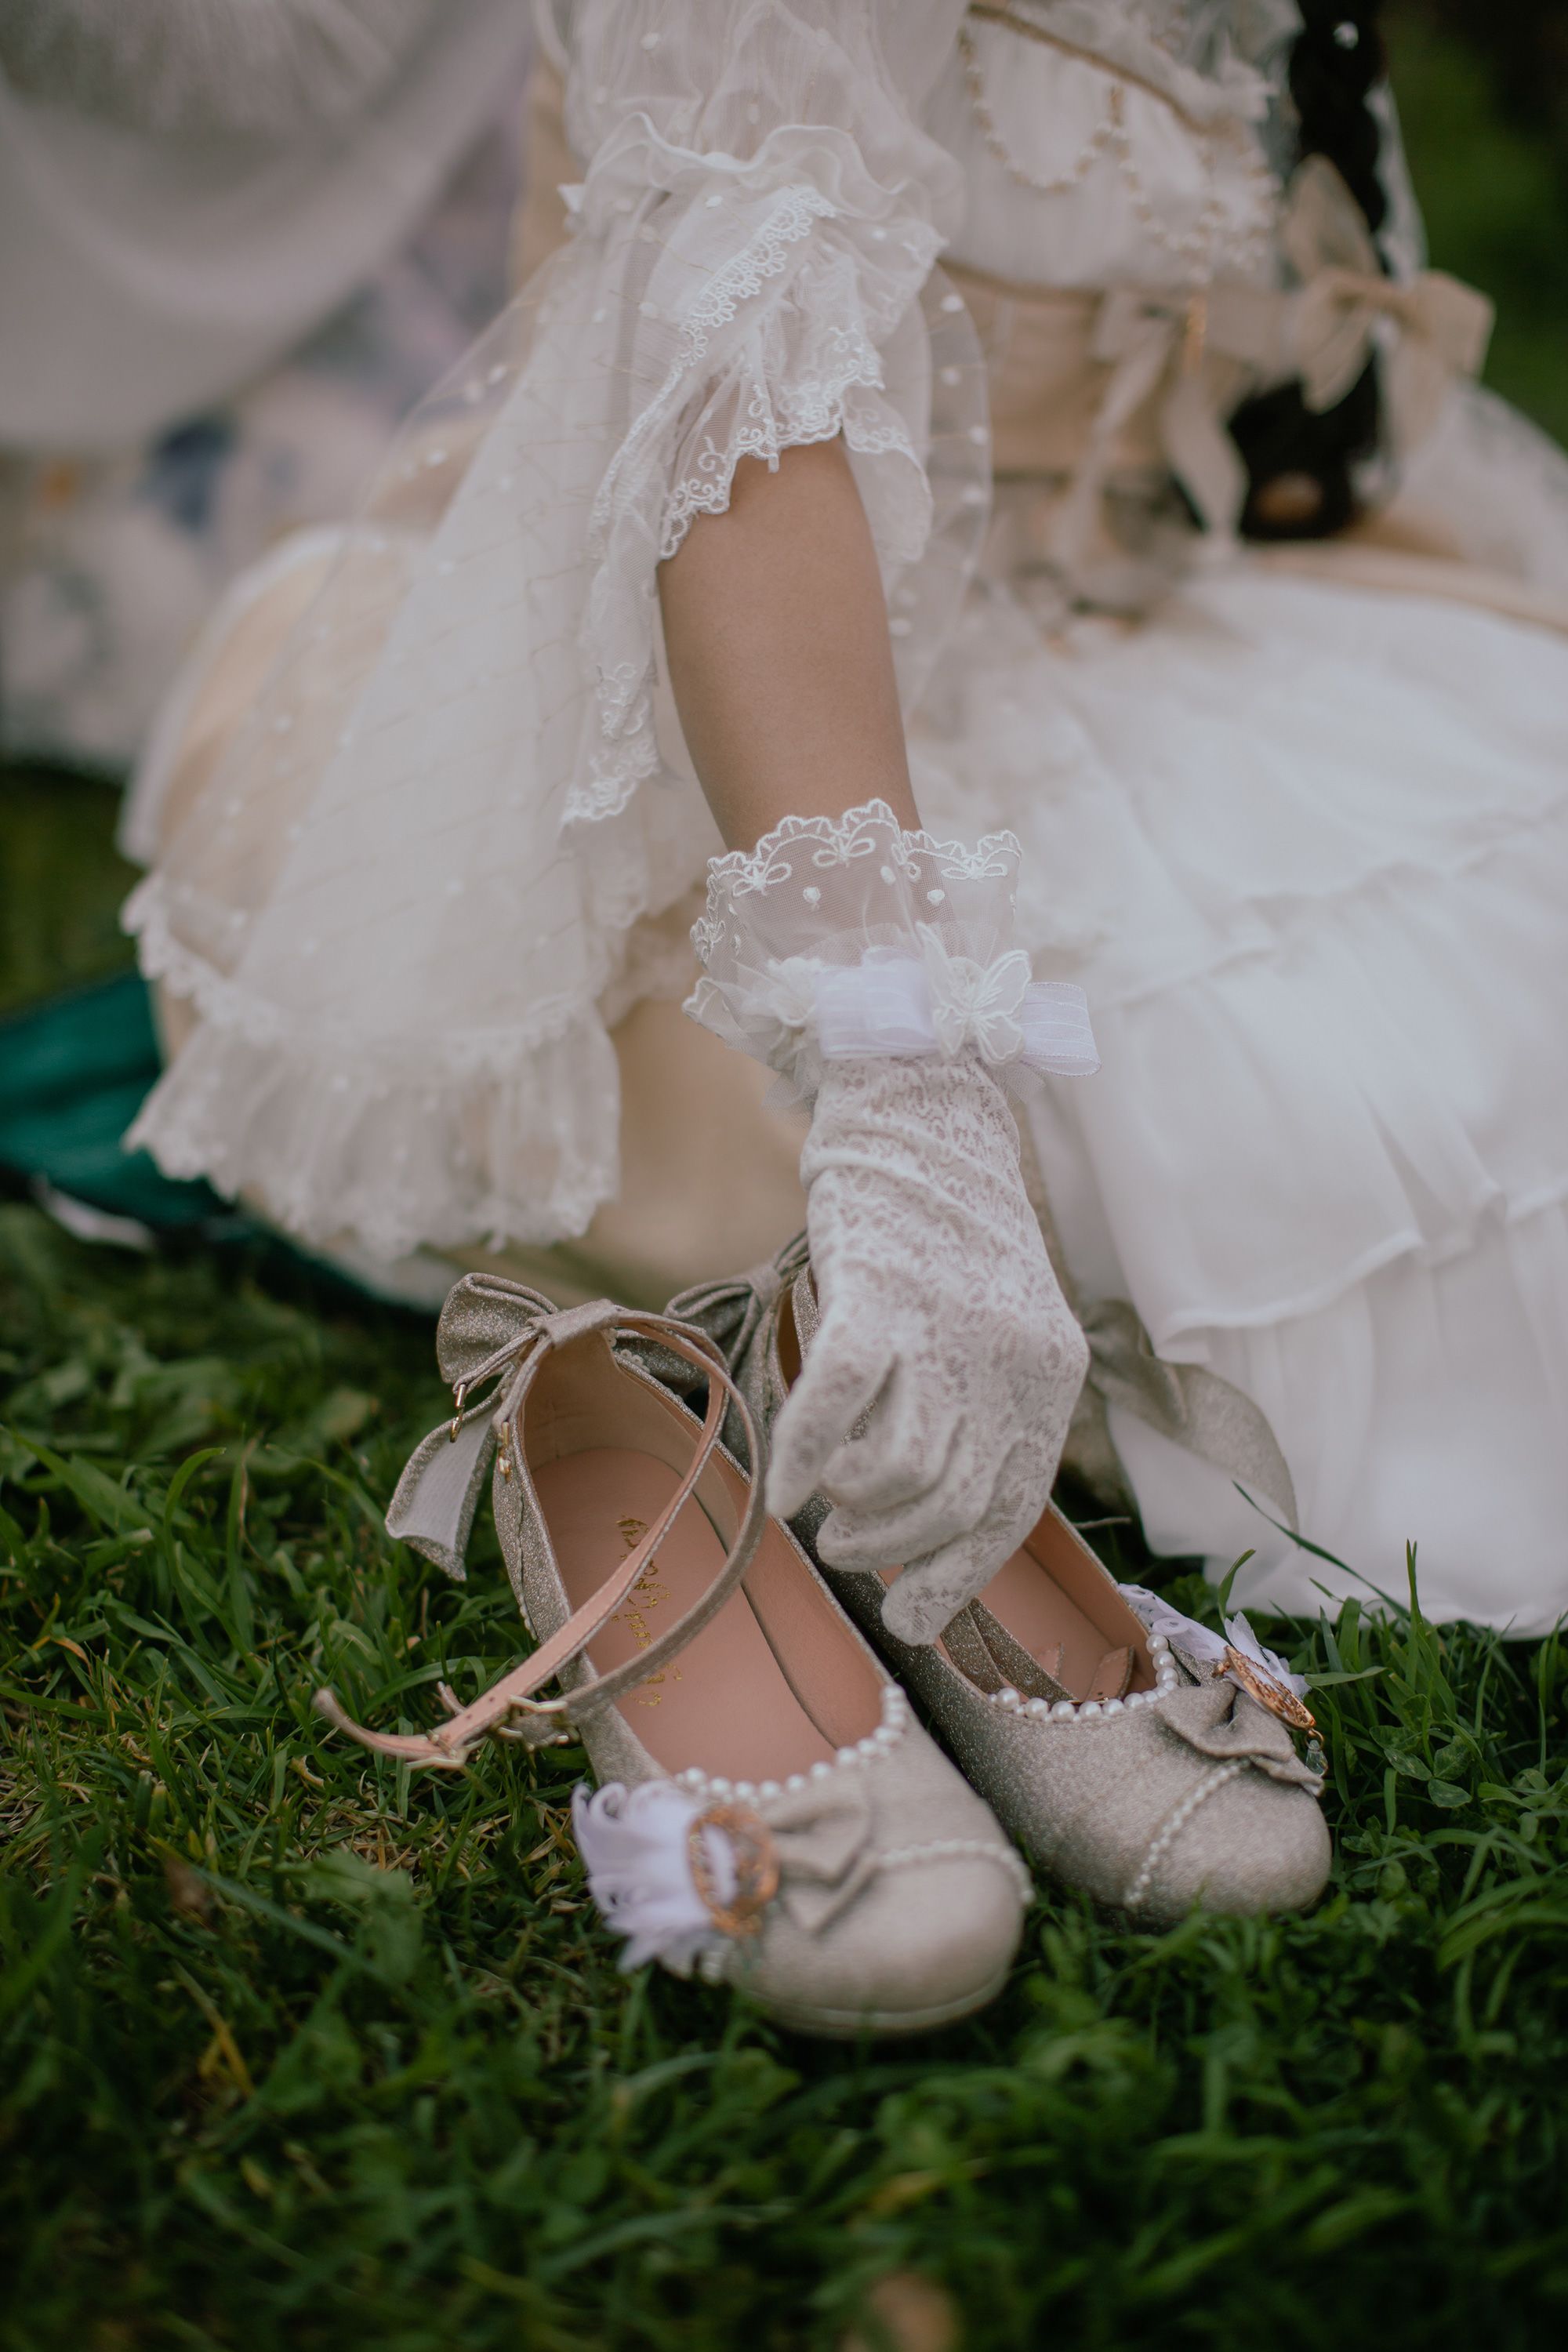 Nghi, wearing white, lace gloves, enjoys a tea party at a garden in Oakland, California, on Feb. 25, 2021. Some Lolitas use knee socks, ankle socks, or tights, together with either high heels or flat shoes with a bow.